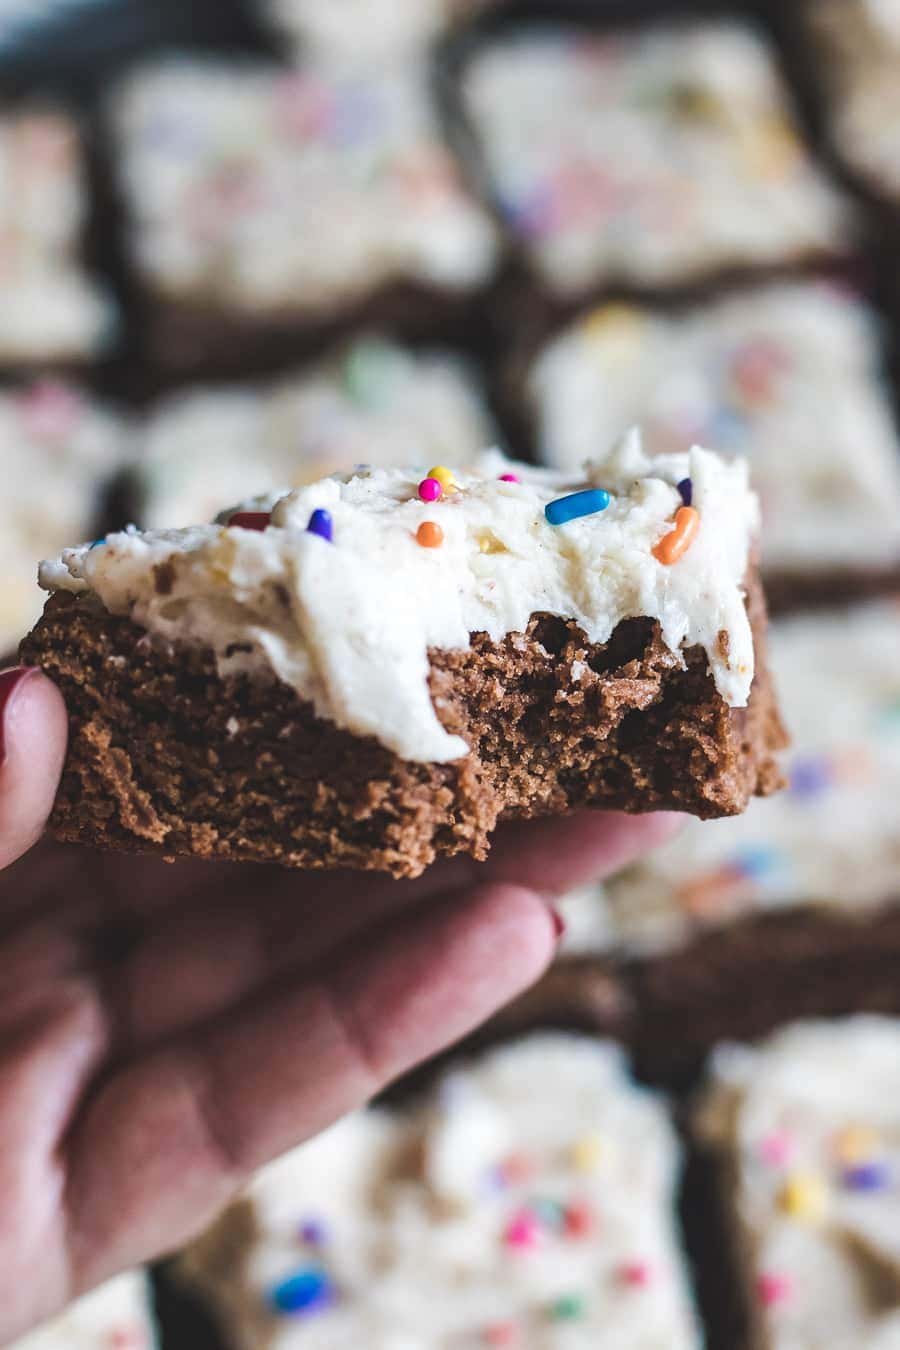 Bourbon Brownies with Brown Butter Frosting. Fluffy, chocolate brownies spiked with bourbon then topped with a creamy brown butter frosting that is TO DIE FOR!